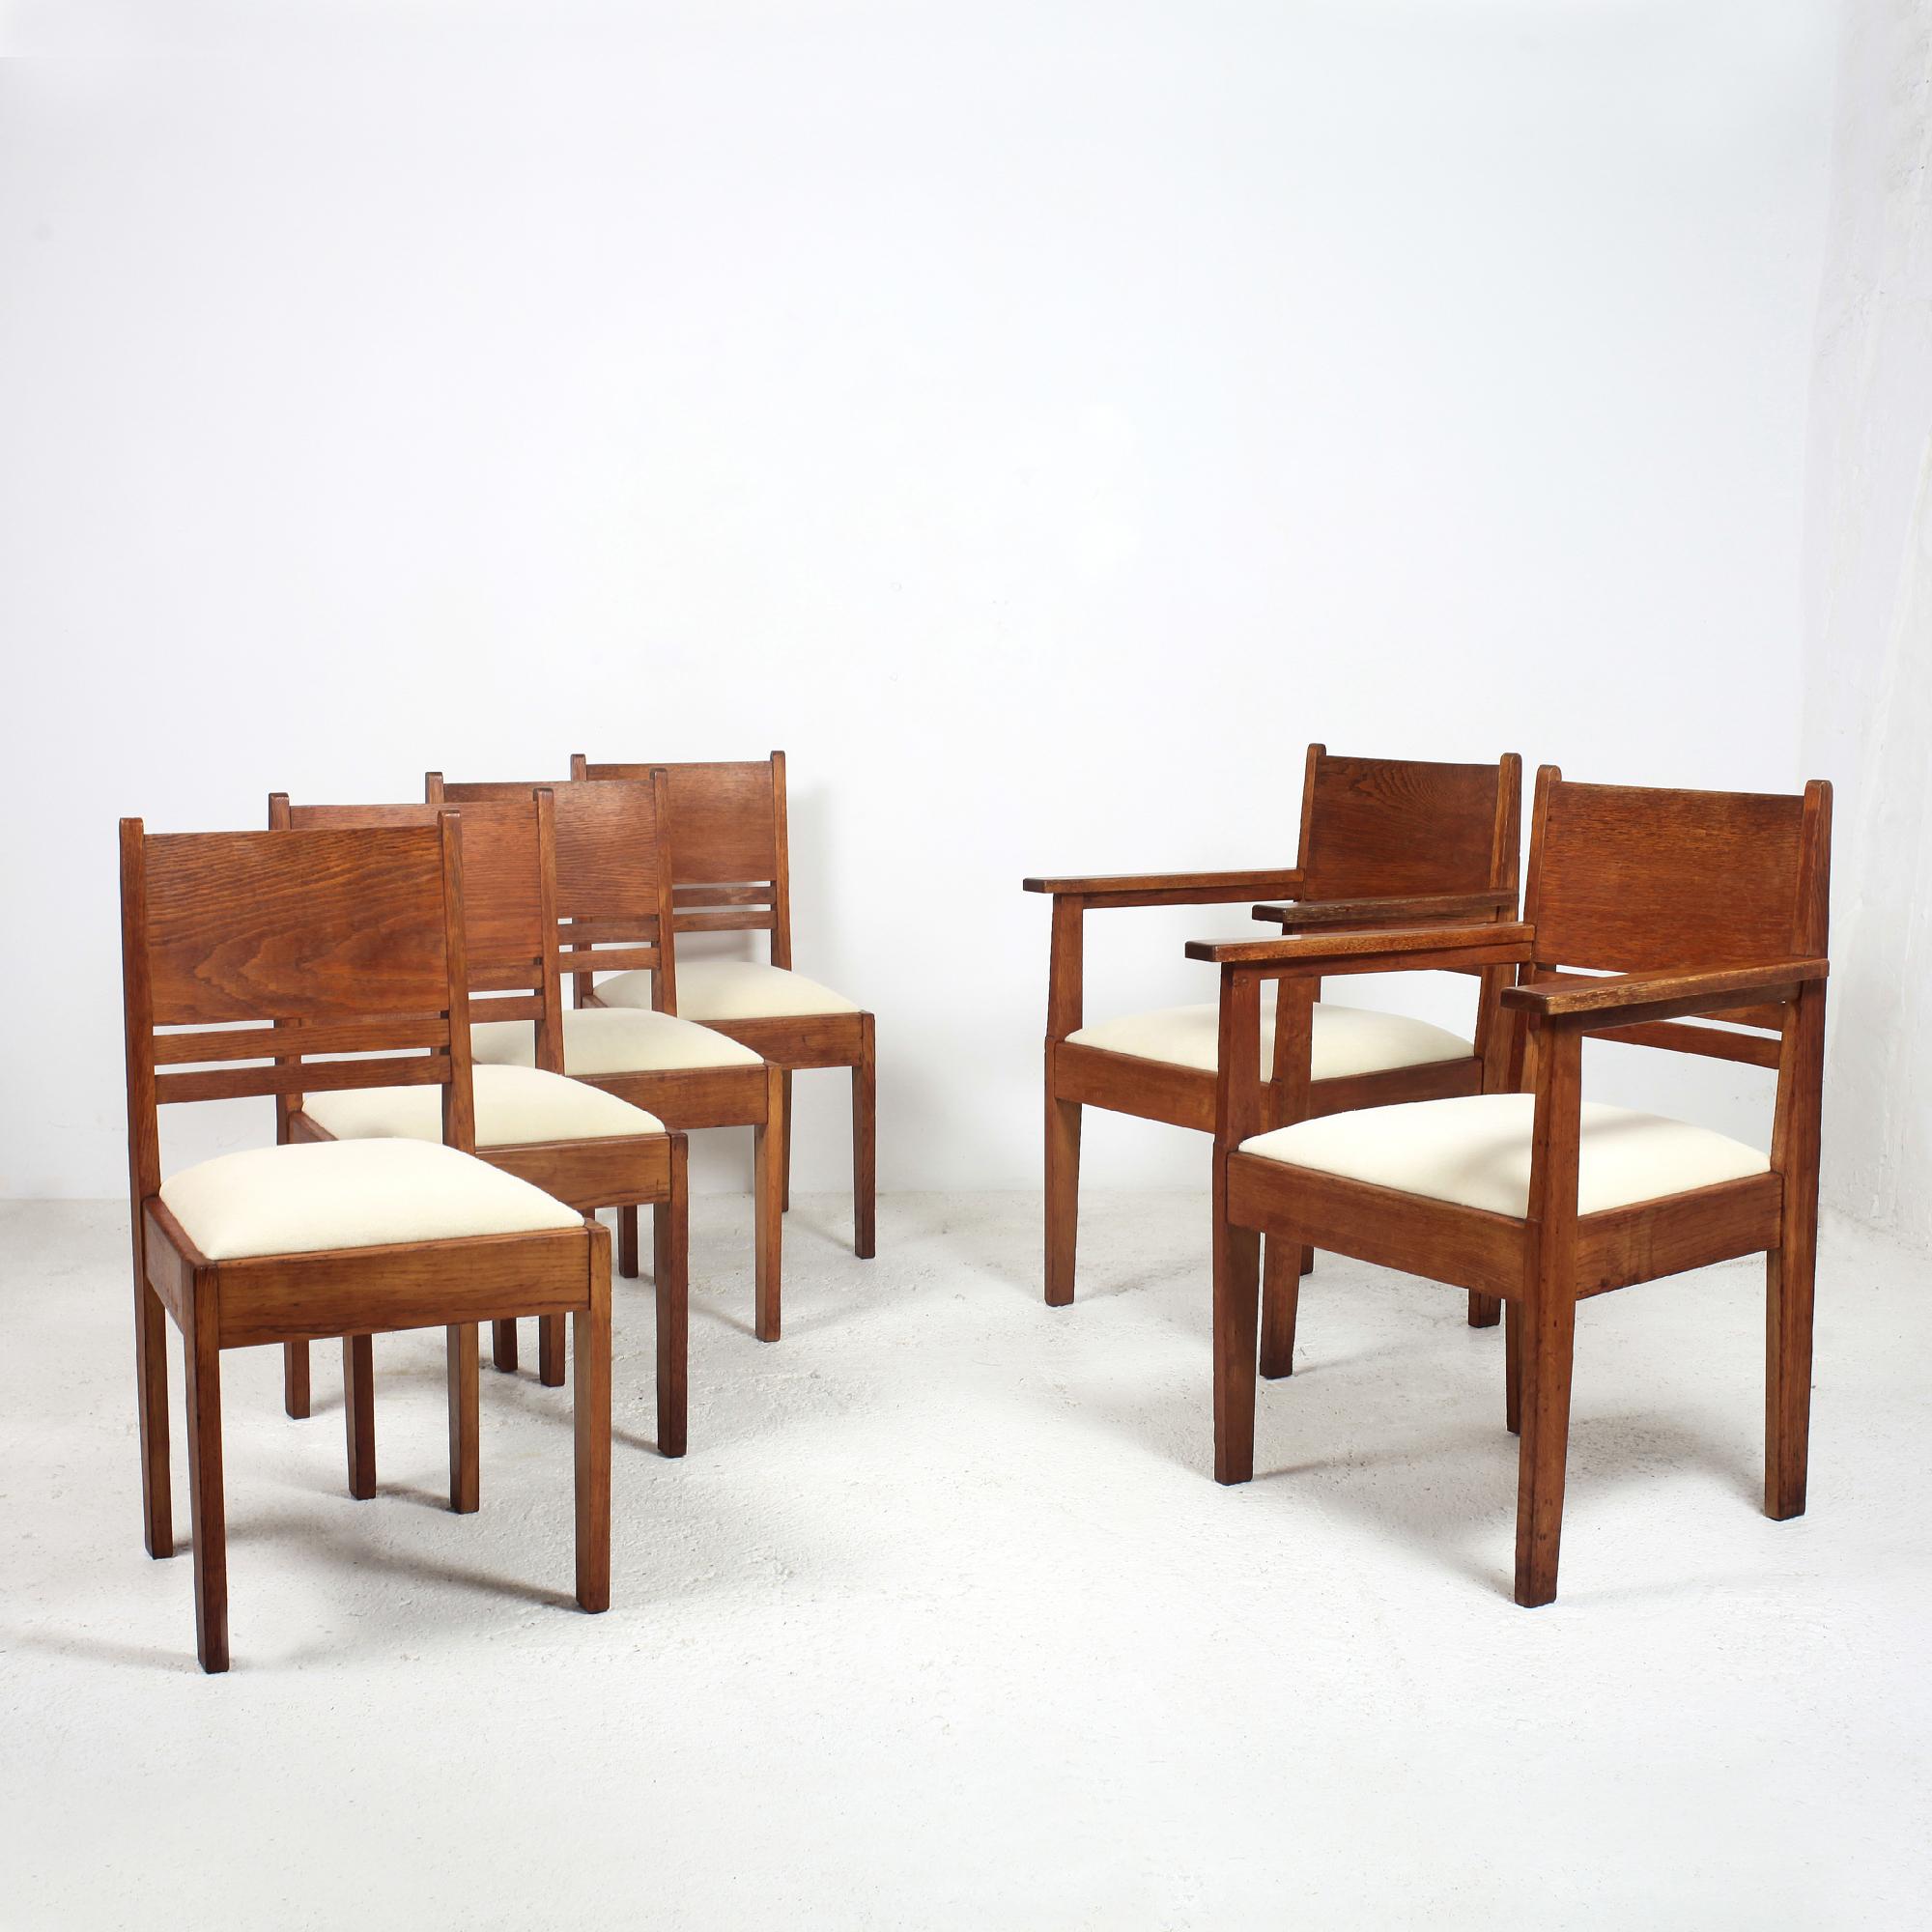 Nice and brutalist solid oak dining room set figuring 4 chairs and 2 armchairs
Reconstruction period 1940-1950
Reupholstered in creamy wool velour with new foam and new strap
In the style of Jean Prouvé, Rene Gabriel, Francis Jourdain.
Beautiful